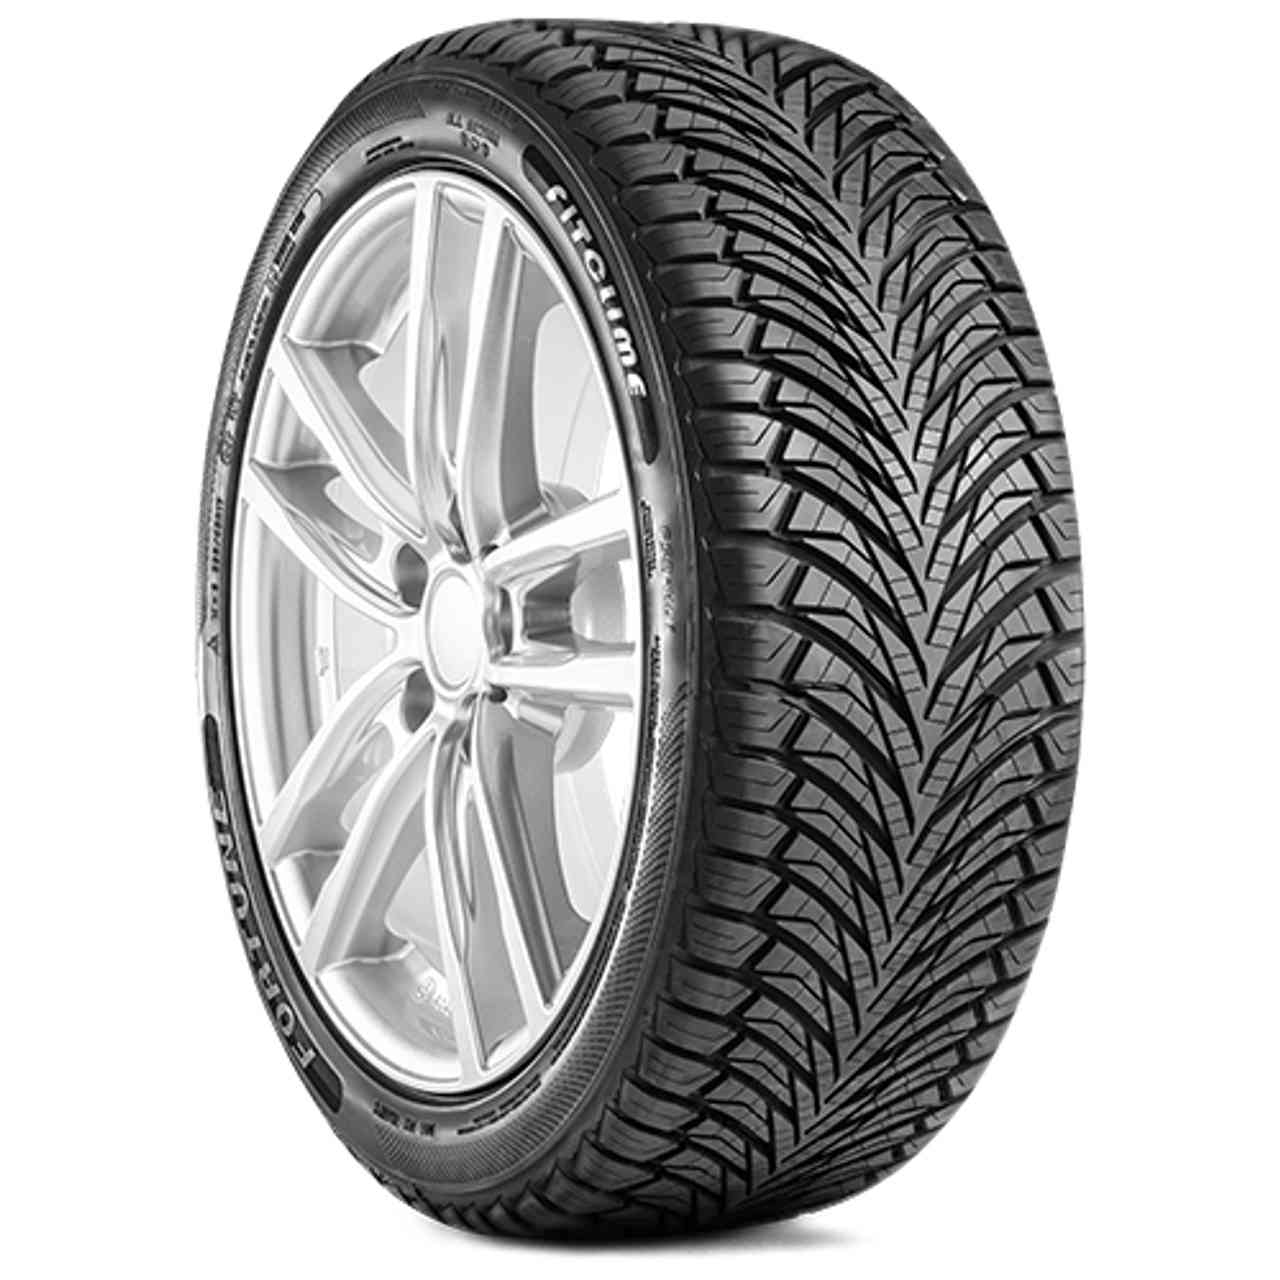 FORTUNE FITCLIME FSR-401 235/65R17 108V BSW XL